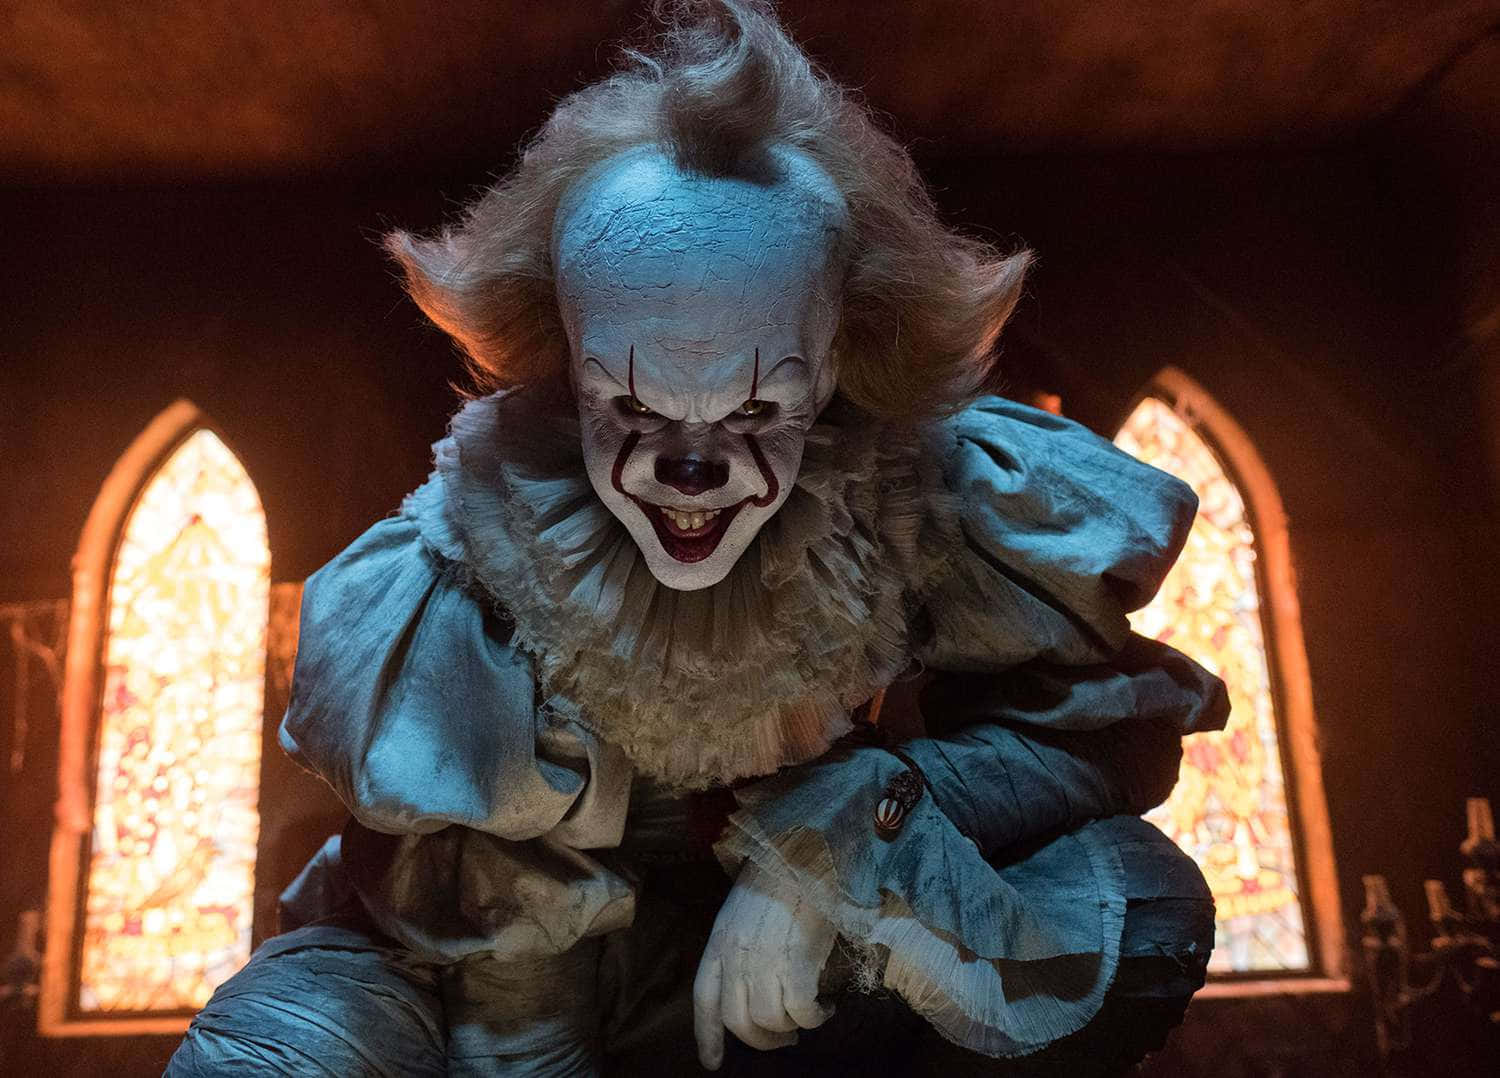 pennywise in it's new trailer